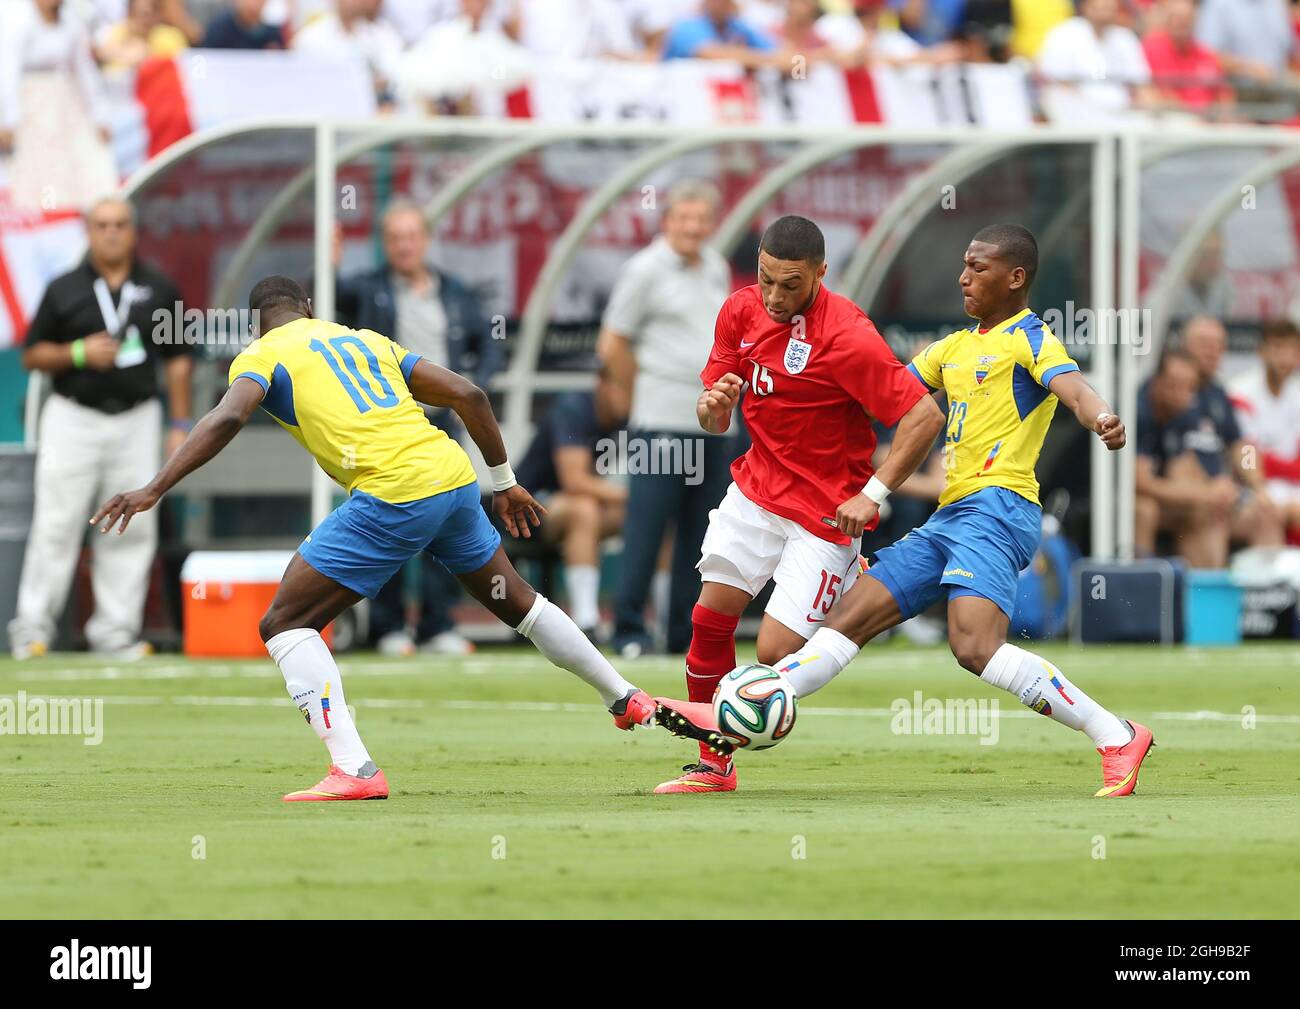 England's Alex Oxlade-Chamberlain in action during the International Friendly match between England and Ecuador held at Sun Life Stadium in Miami, USA on June 4, 2014. Pic David Klein/Sportimage. Stock Photo